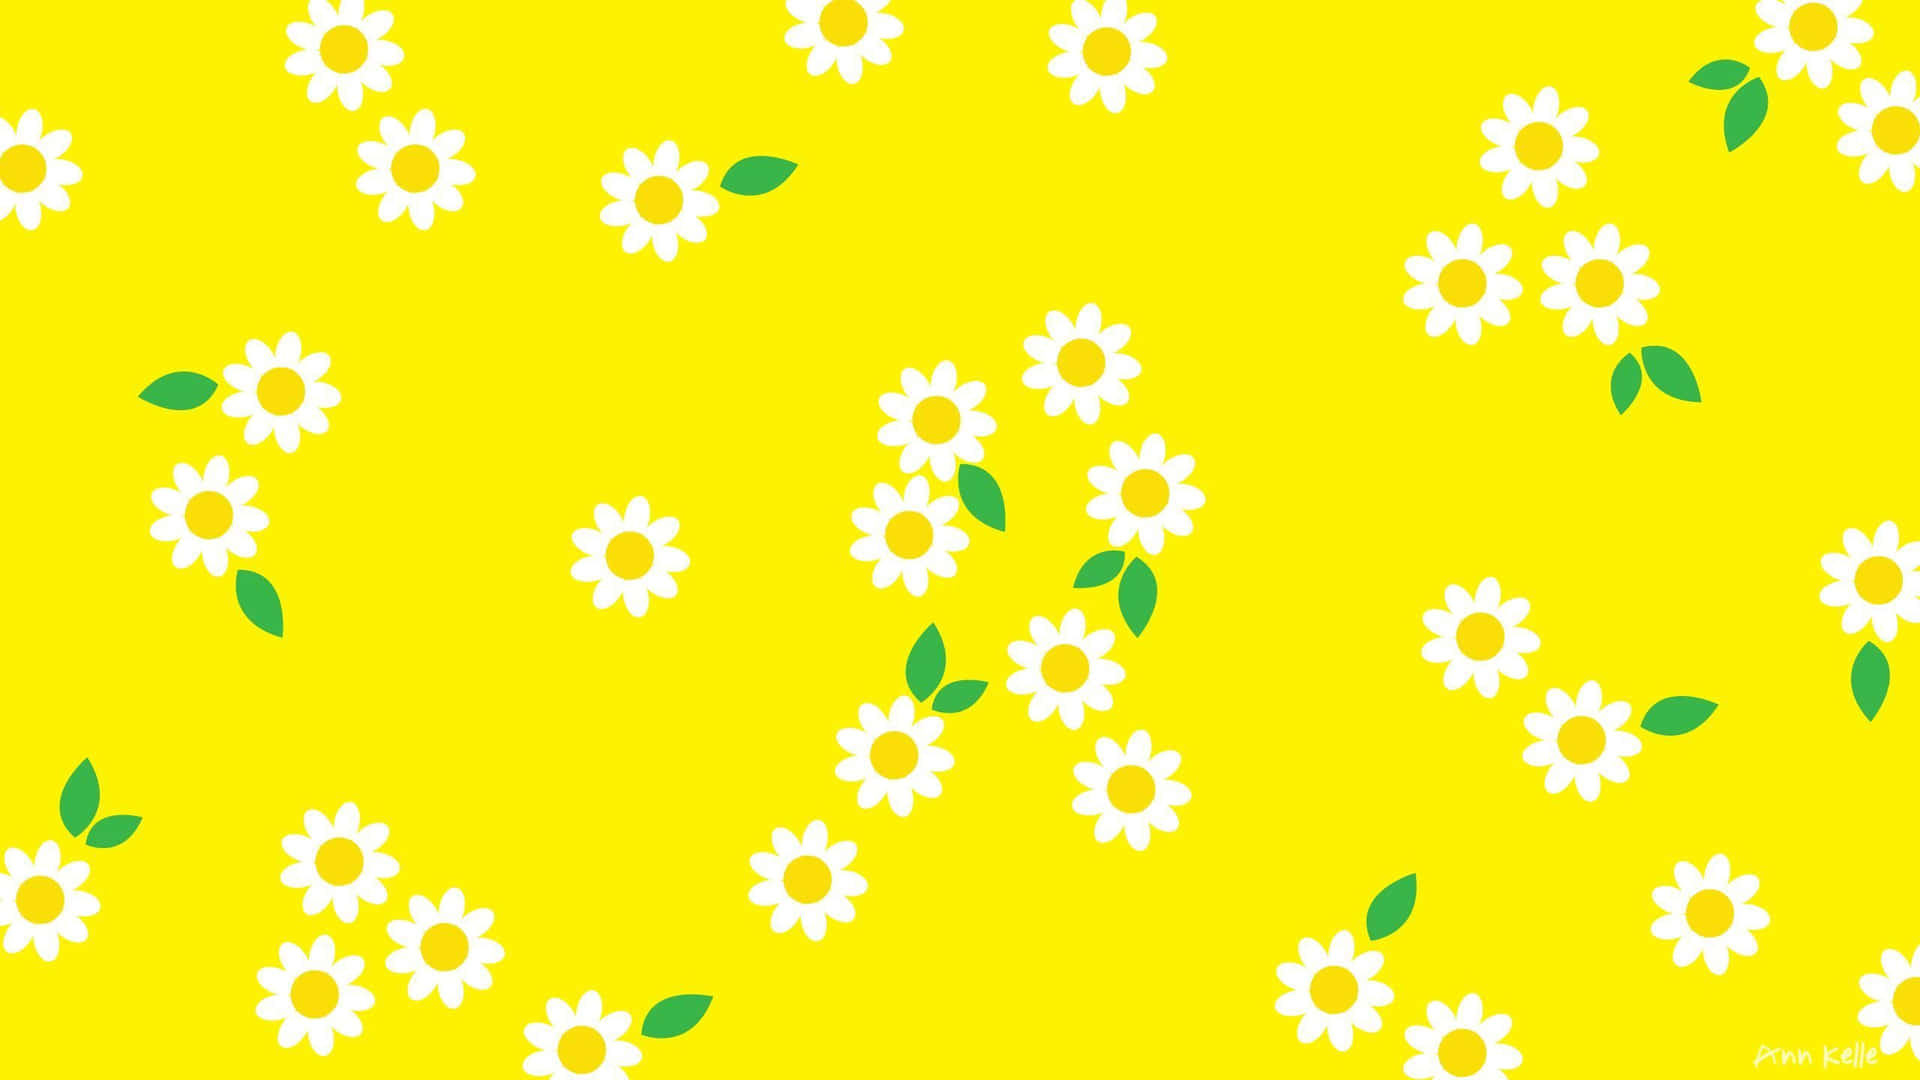 A Yellow Background With White Daisies On It Wallpaper